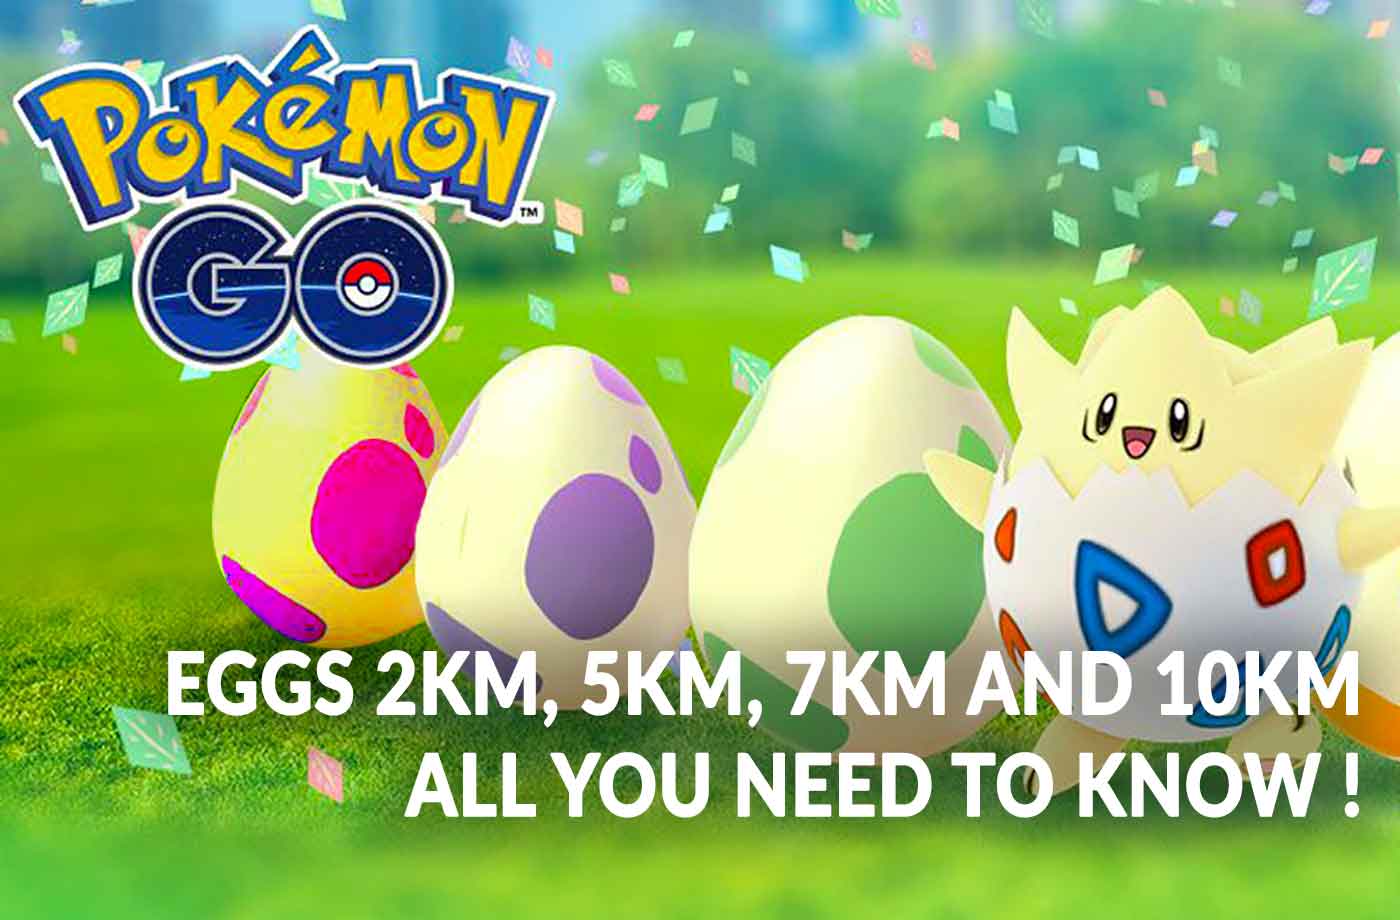 Guide Pokemon Go all you need to know about eggs 2Km, 5Km, 7Km and 10Km ...